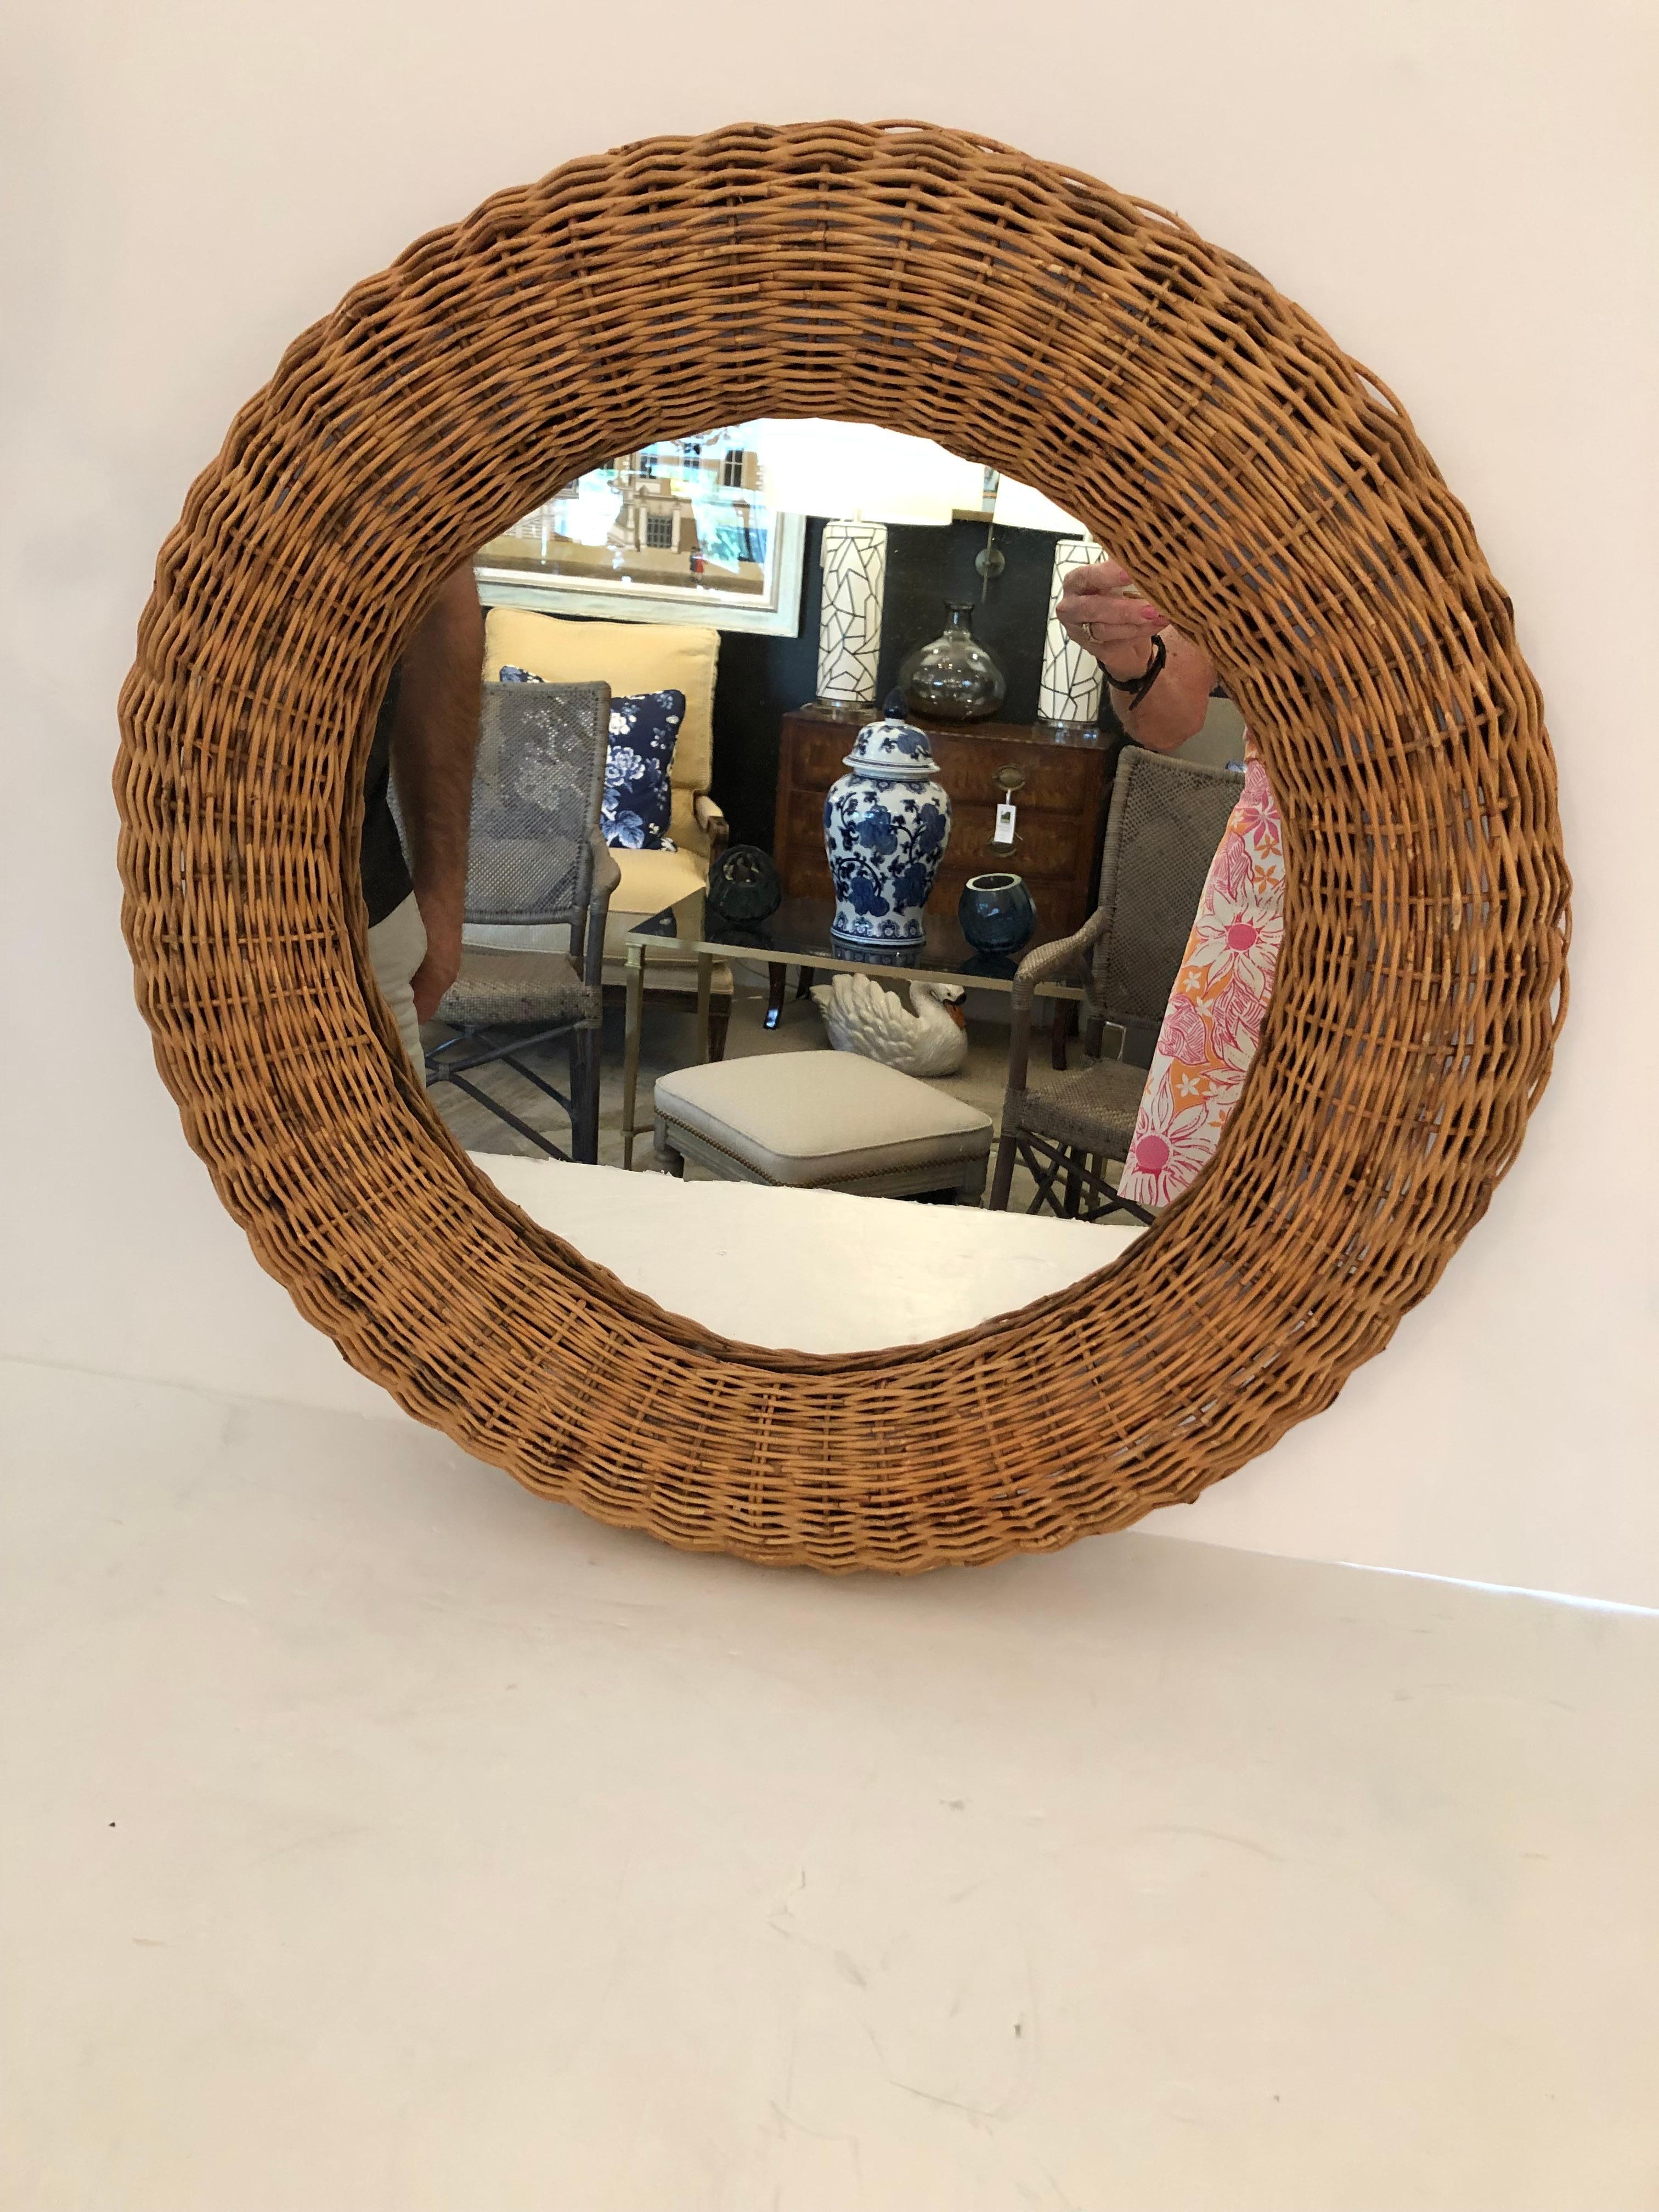 Chic round wicker framed mirror adds an organic modern vibe to any room. 
 Great in a beach house!
Mirror 16 diameter.